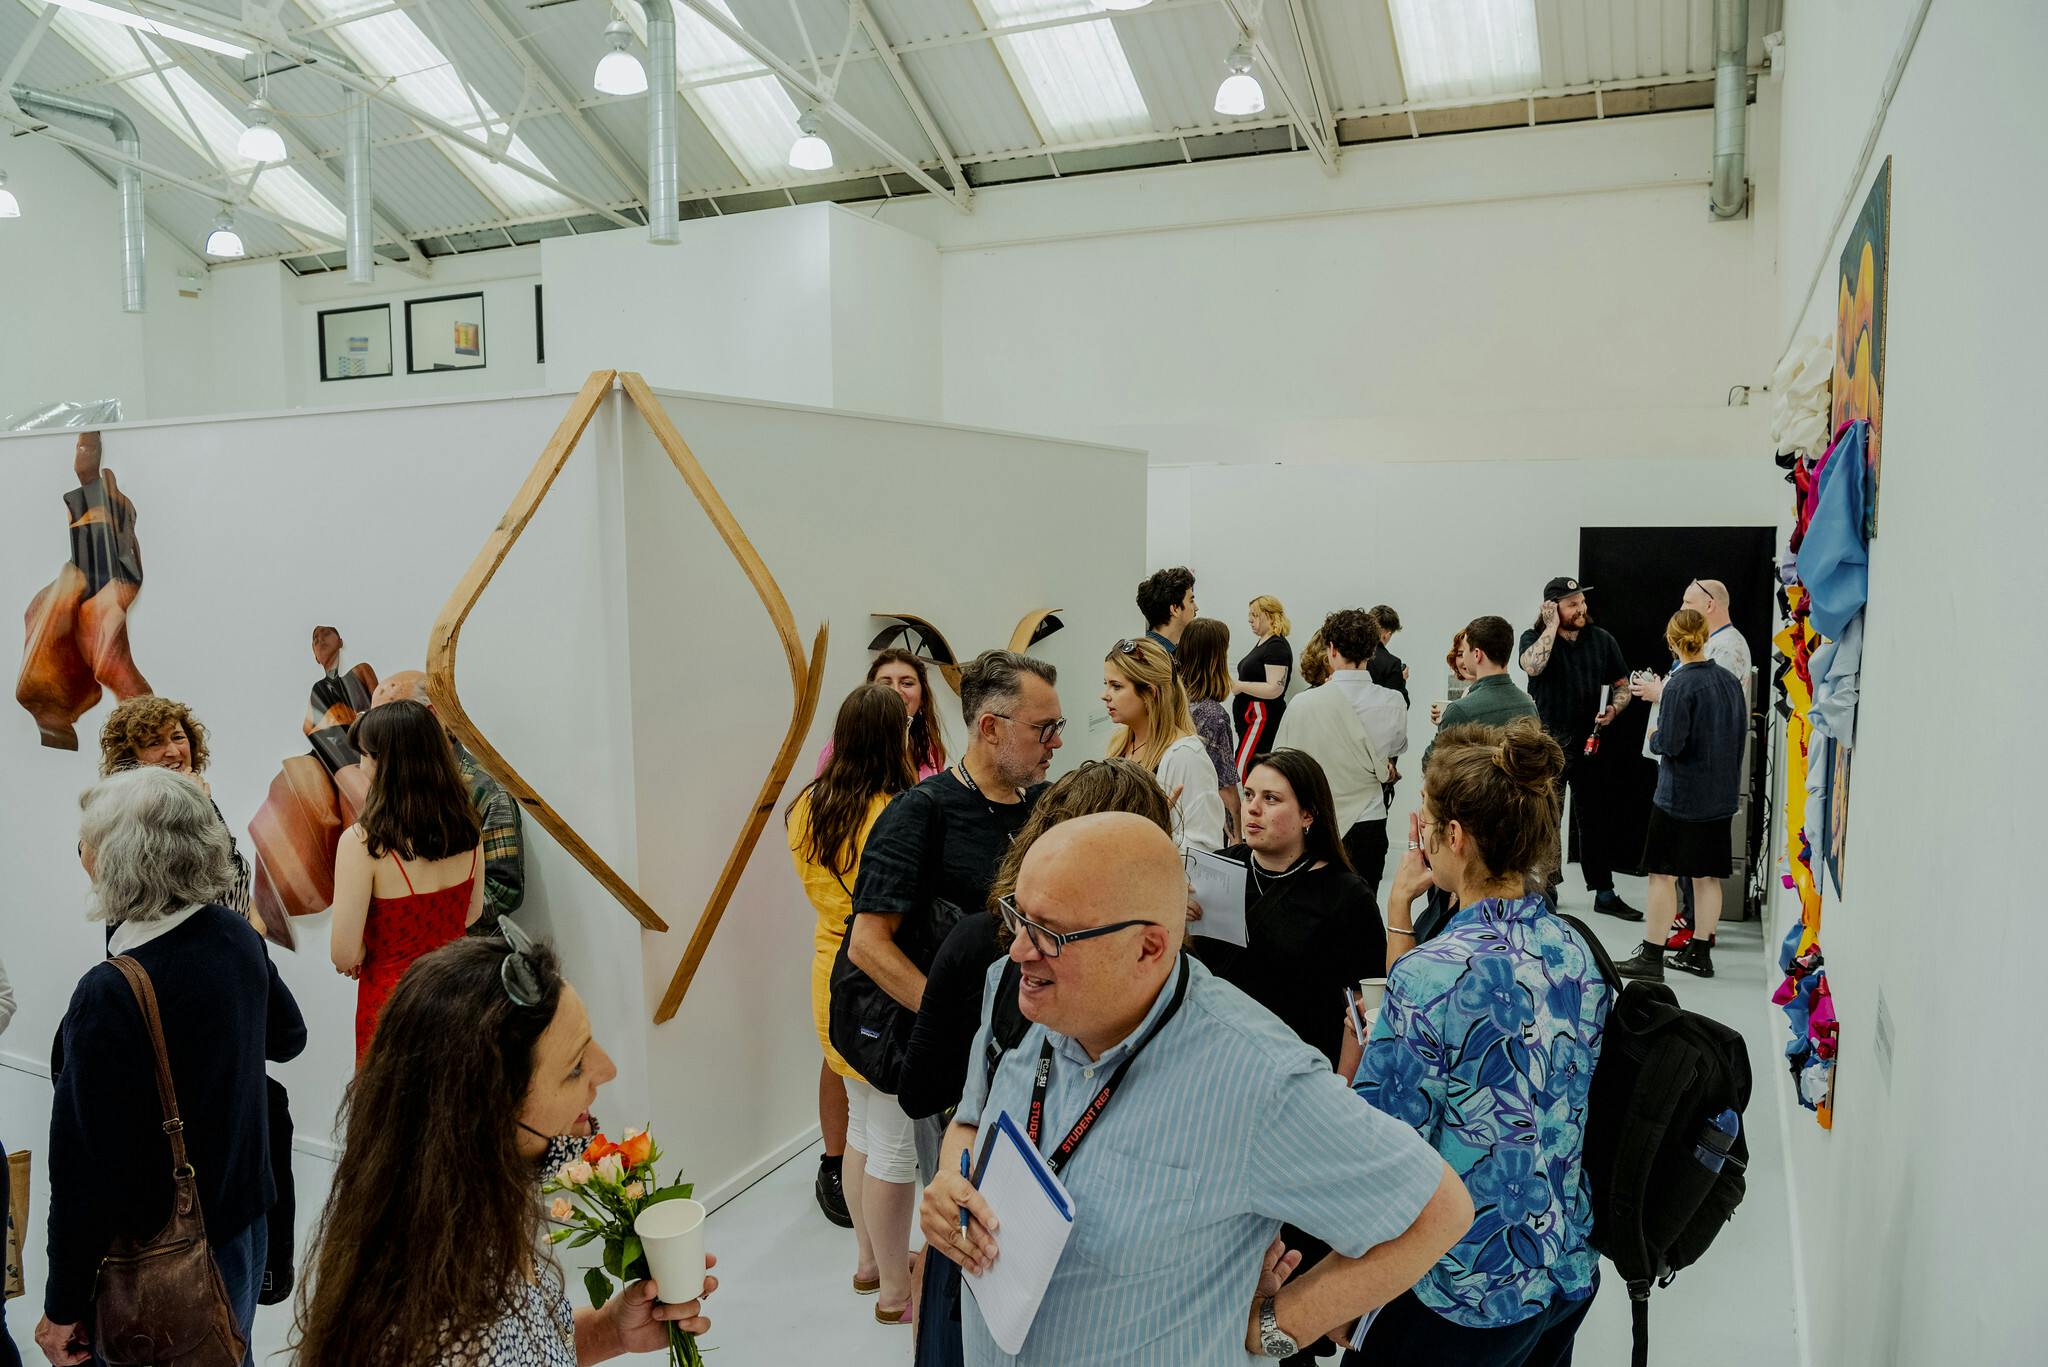 A large white exhibition space is busy with people viewing fine art sculptures